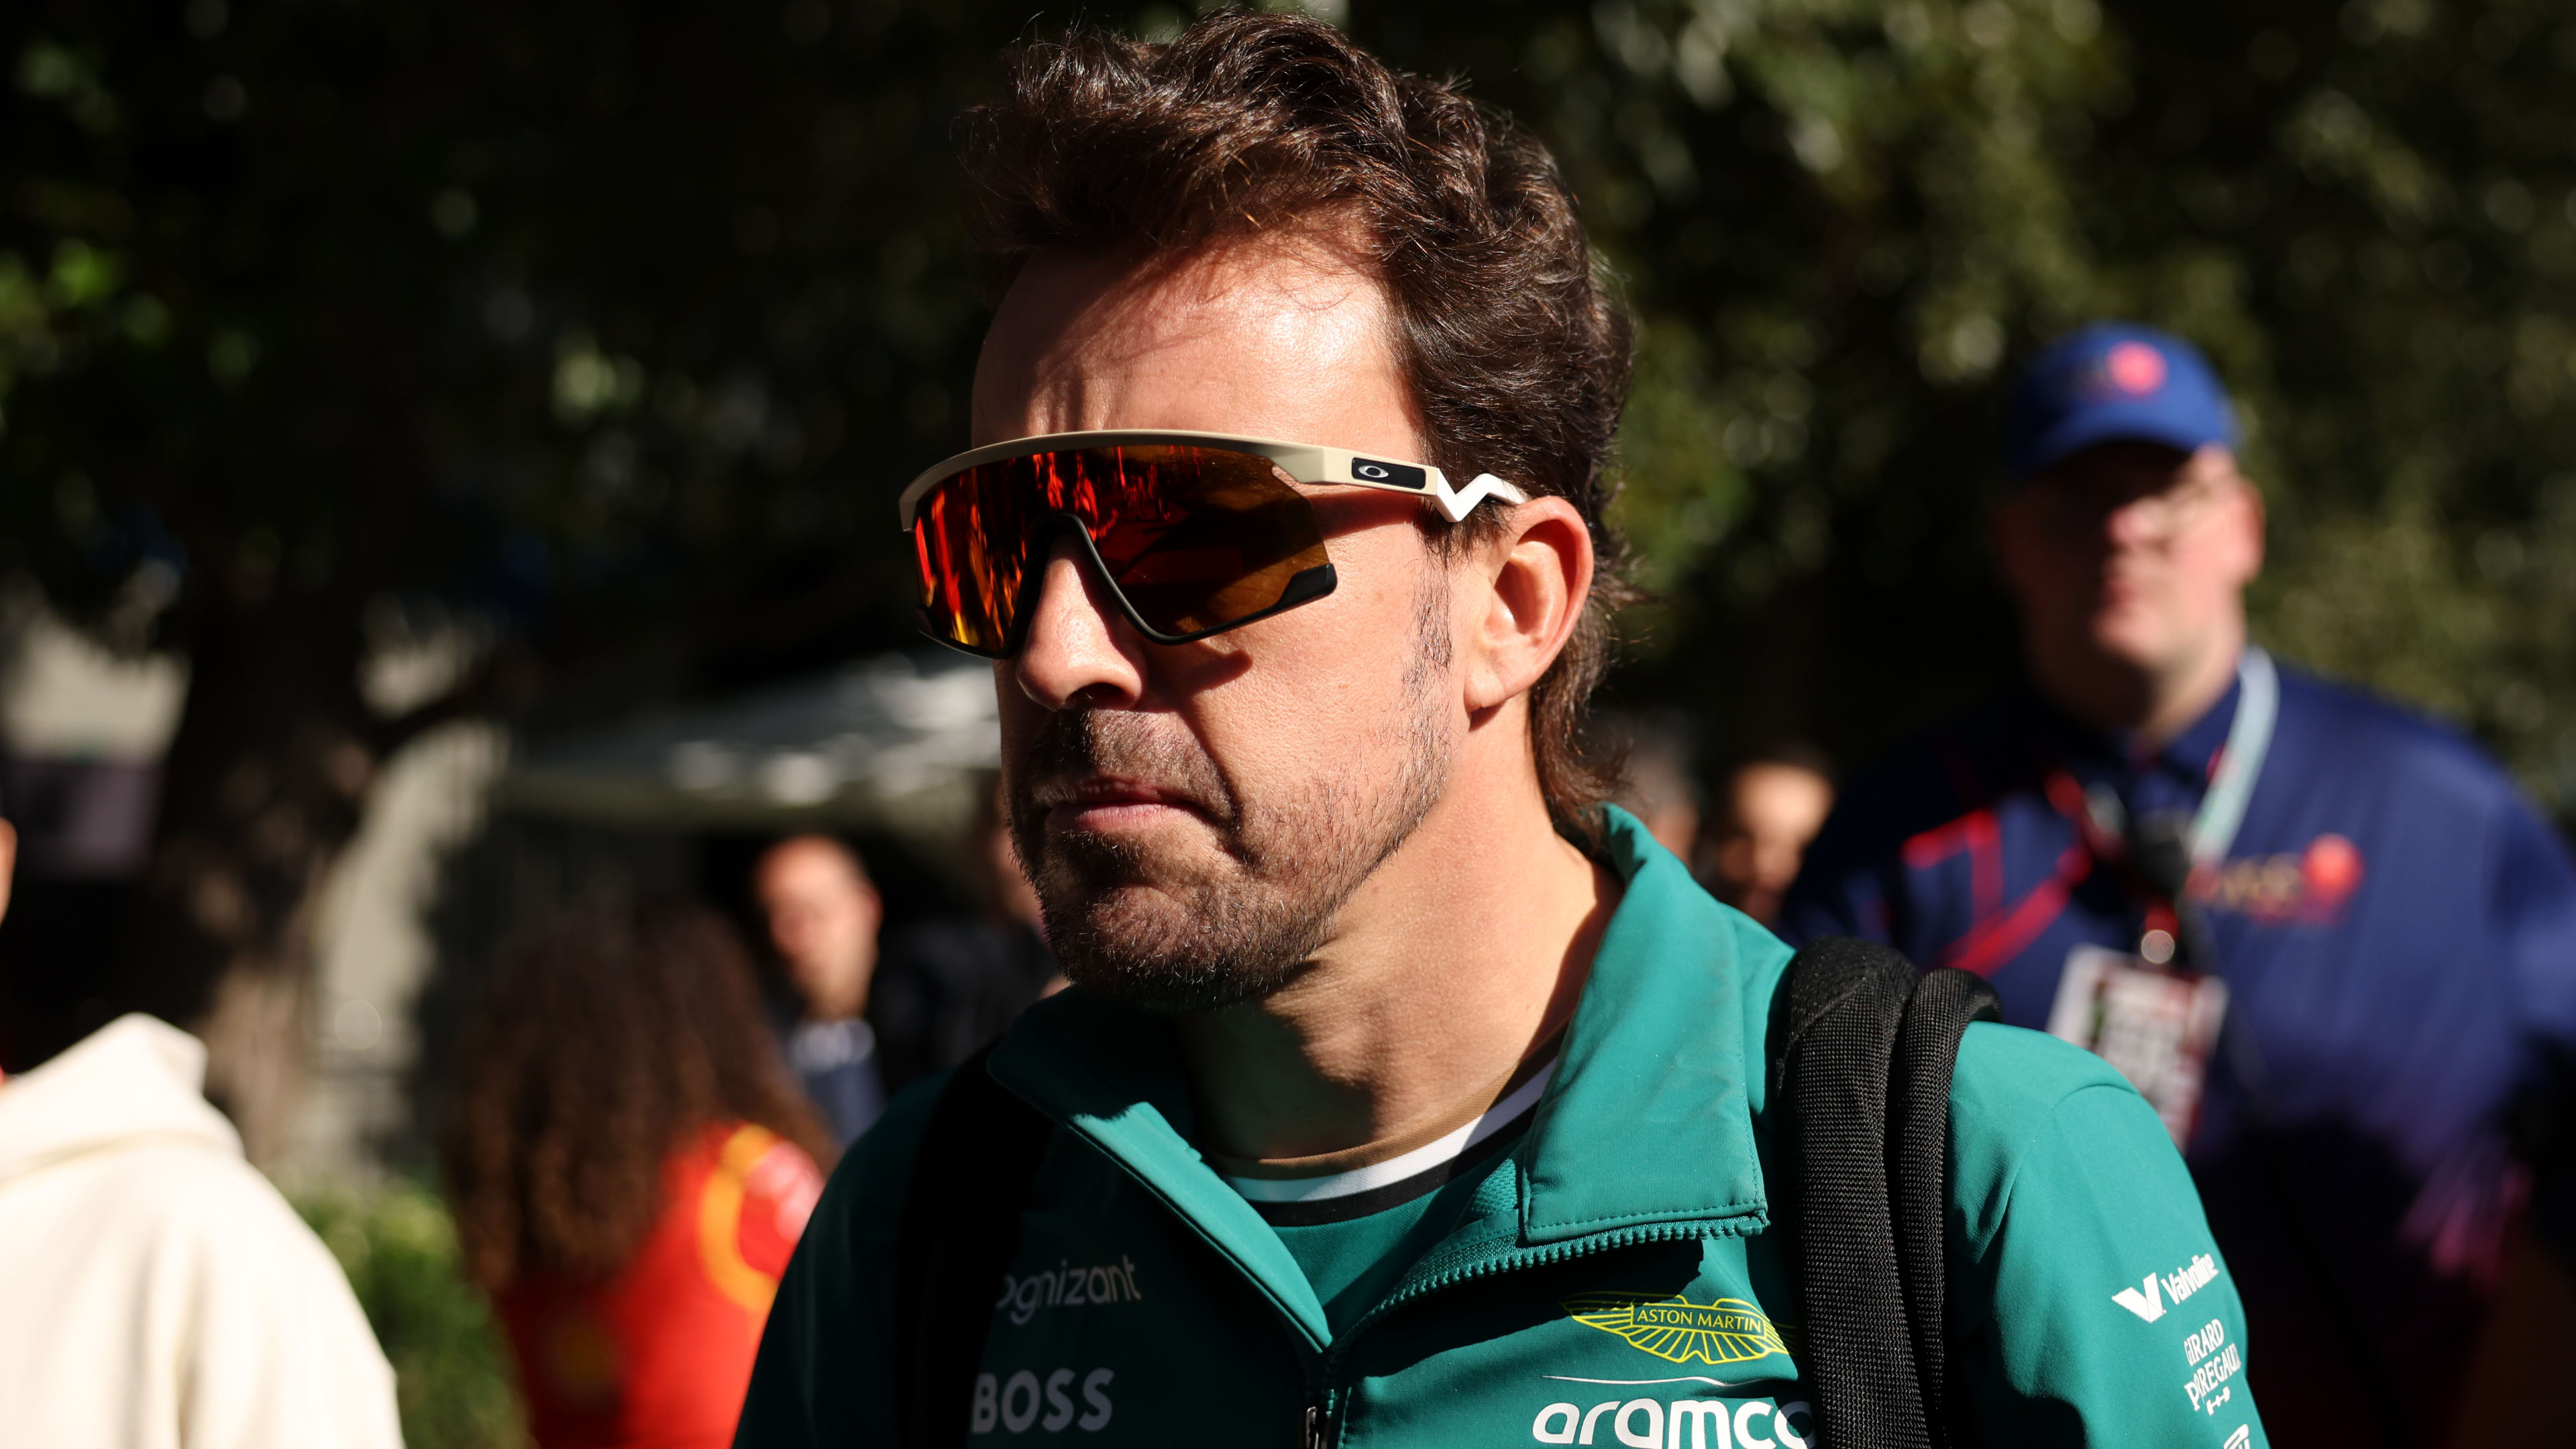 ‘We need to improve’ – Alonso rues ‘very difficult’ weekend for Aston Martin in Australia